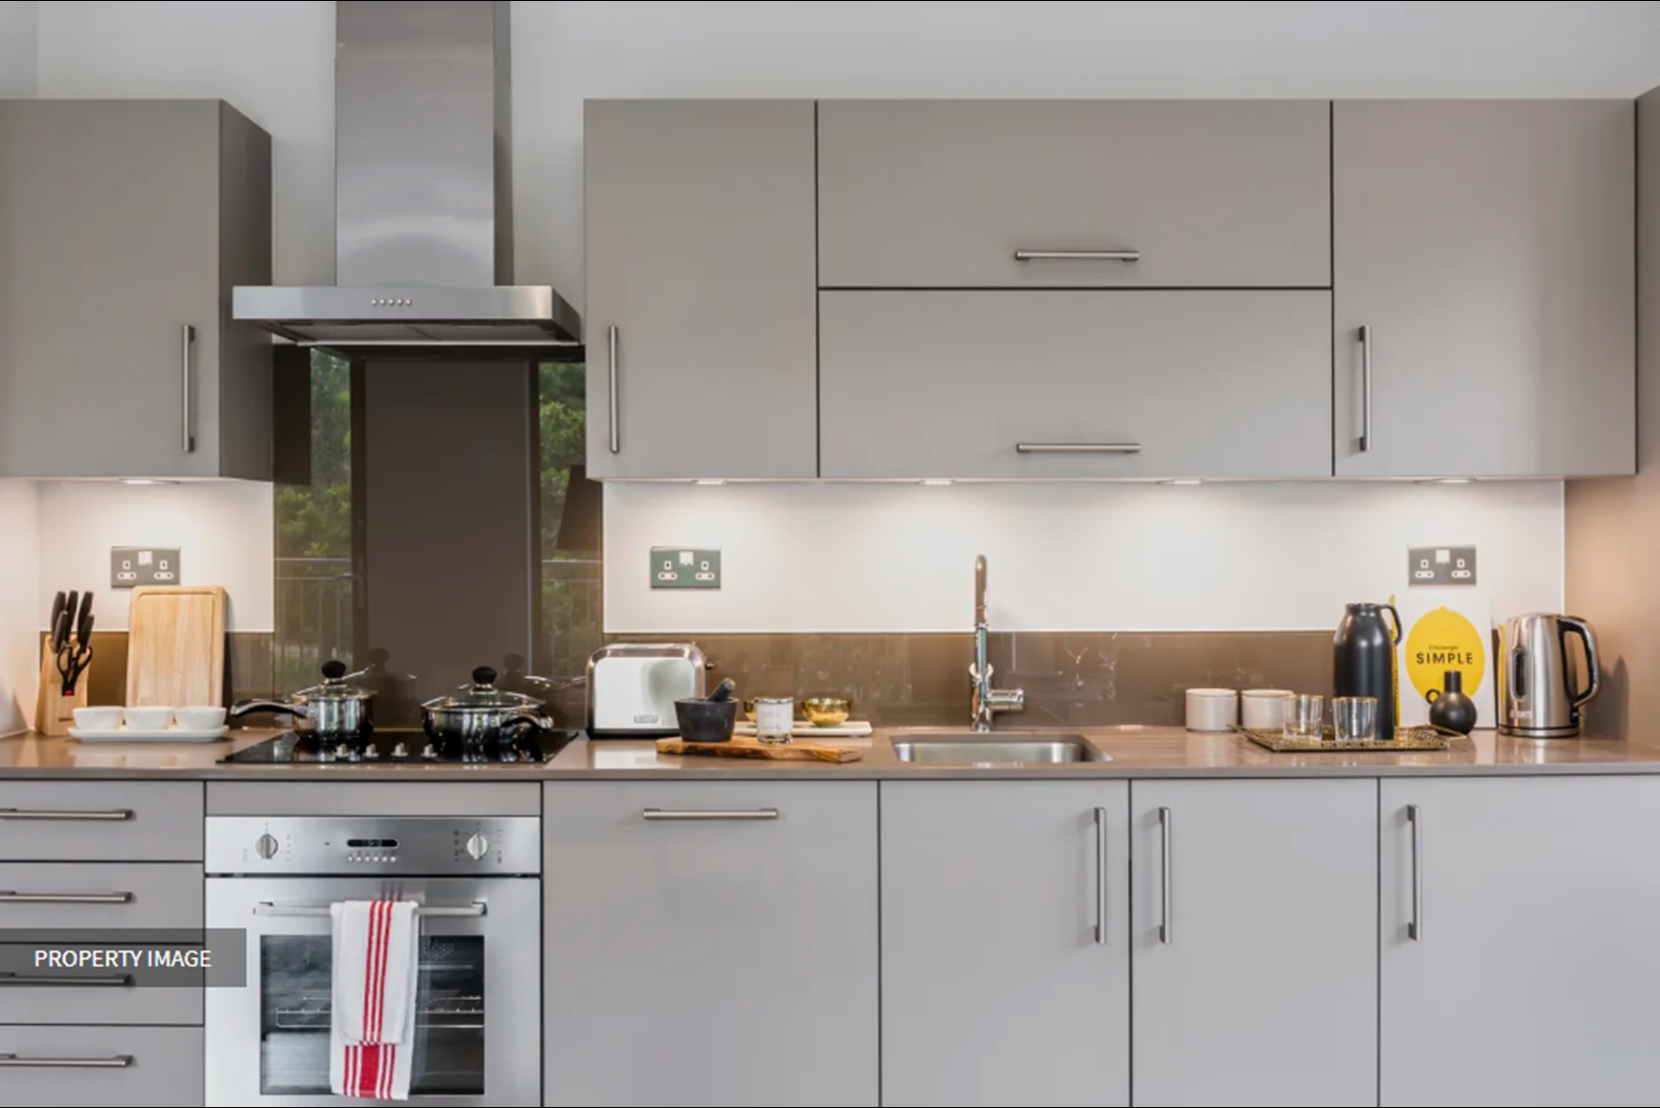 Apartments to Rent by Savills at The Forge, Newham, E6, kitchen